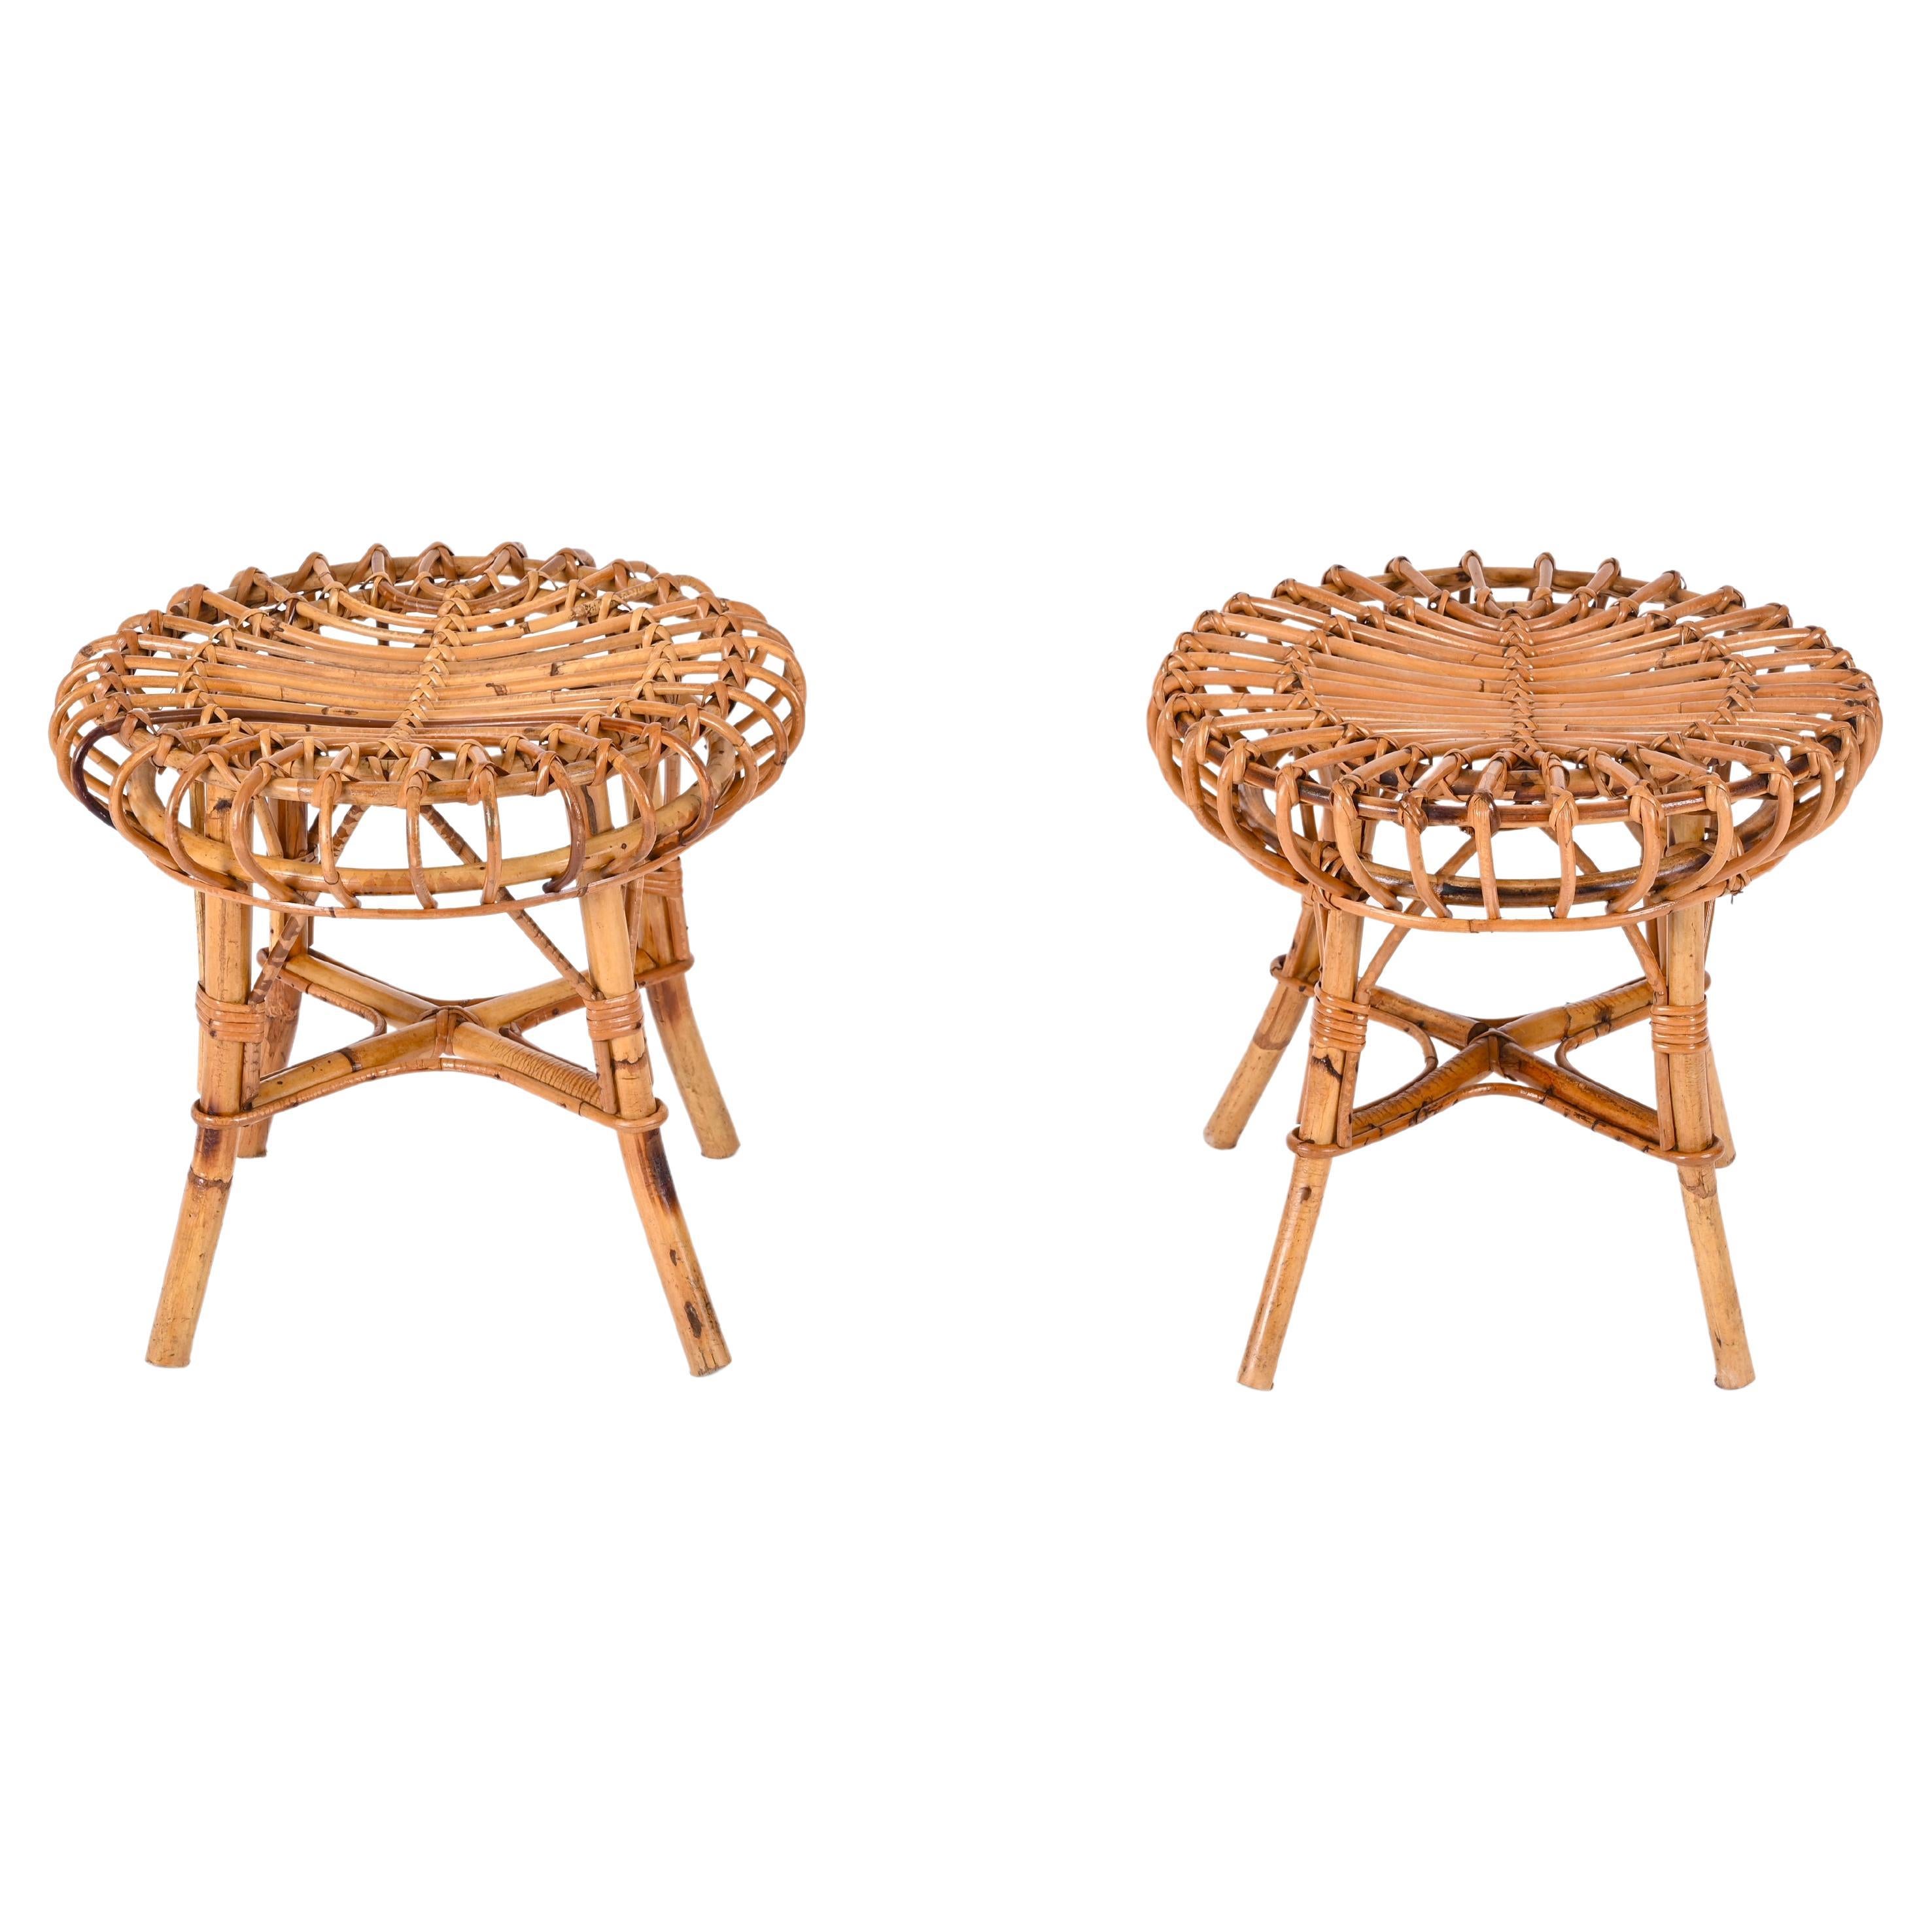 Franco Albini Pair of Rattan and Bamboo Round Ottoman Stool, Italy, 1960s